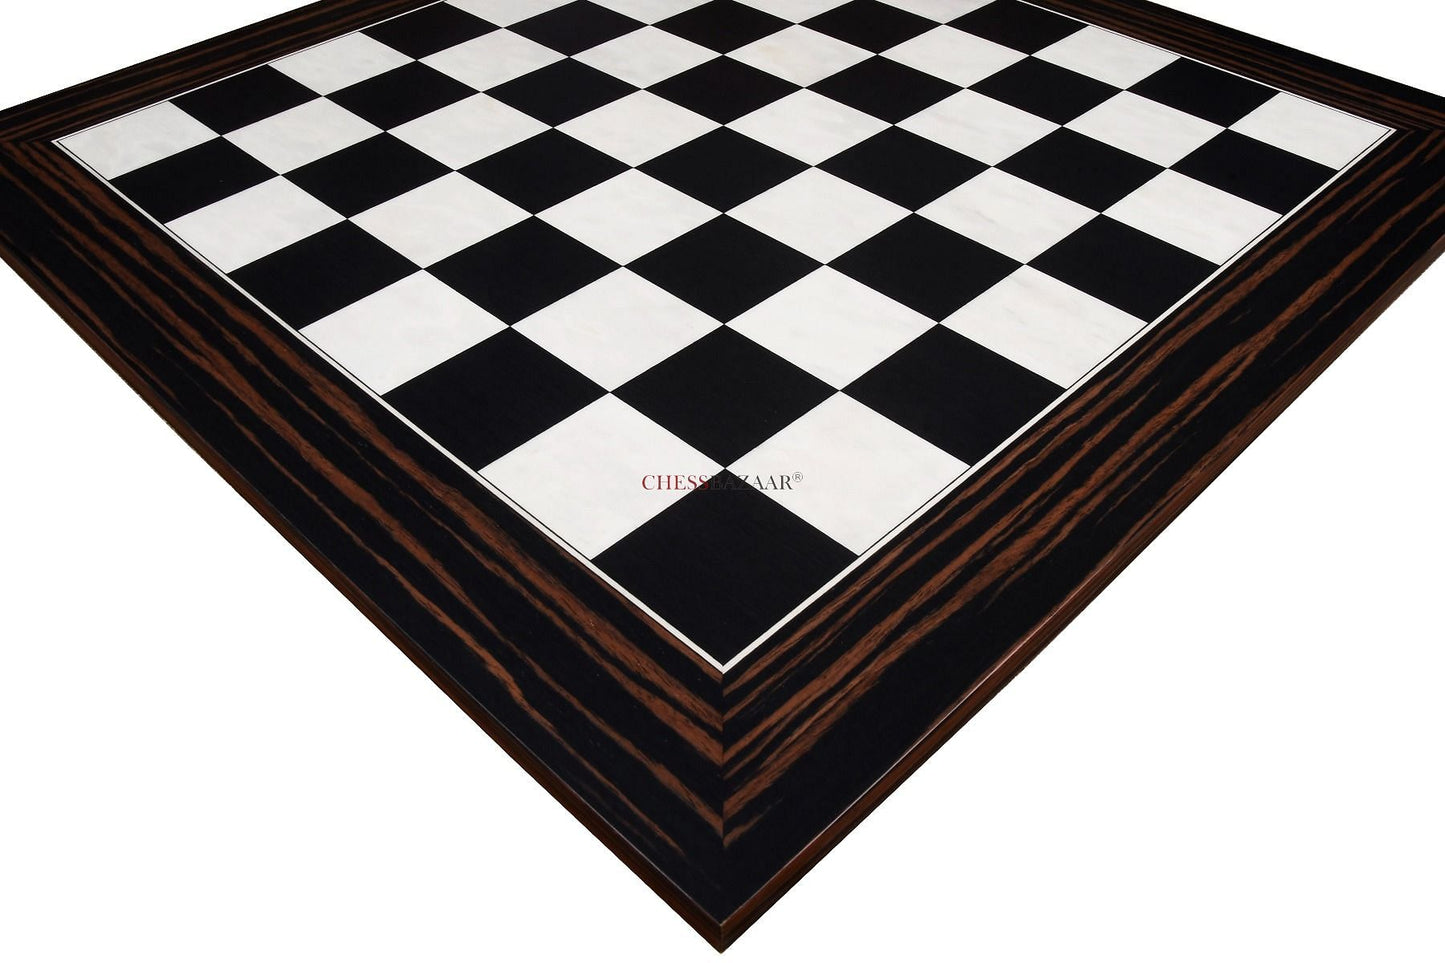 Wooden Deluxe Black Dyed Poplar & White Erable with Matte Finish Chess Board 24" - 60 mm